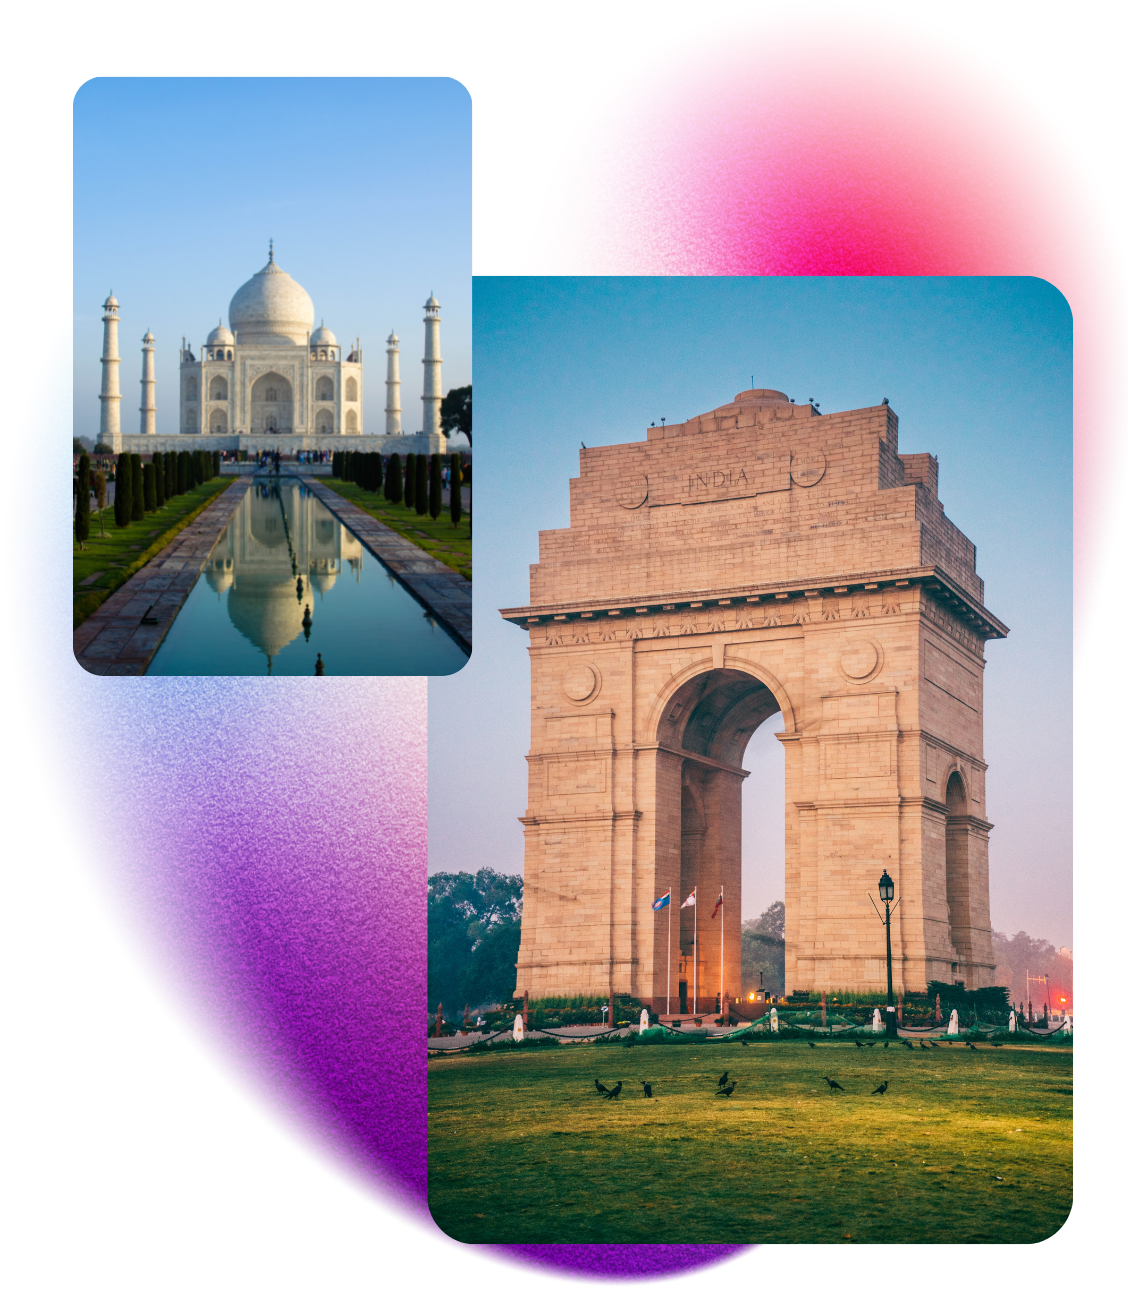 Join Acumen at the Global Gateway Summit 2023: India